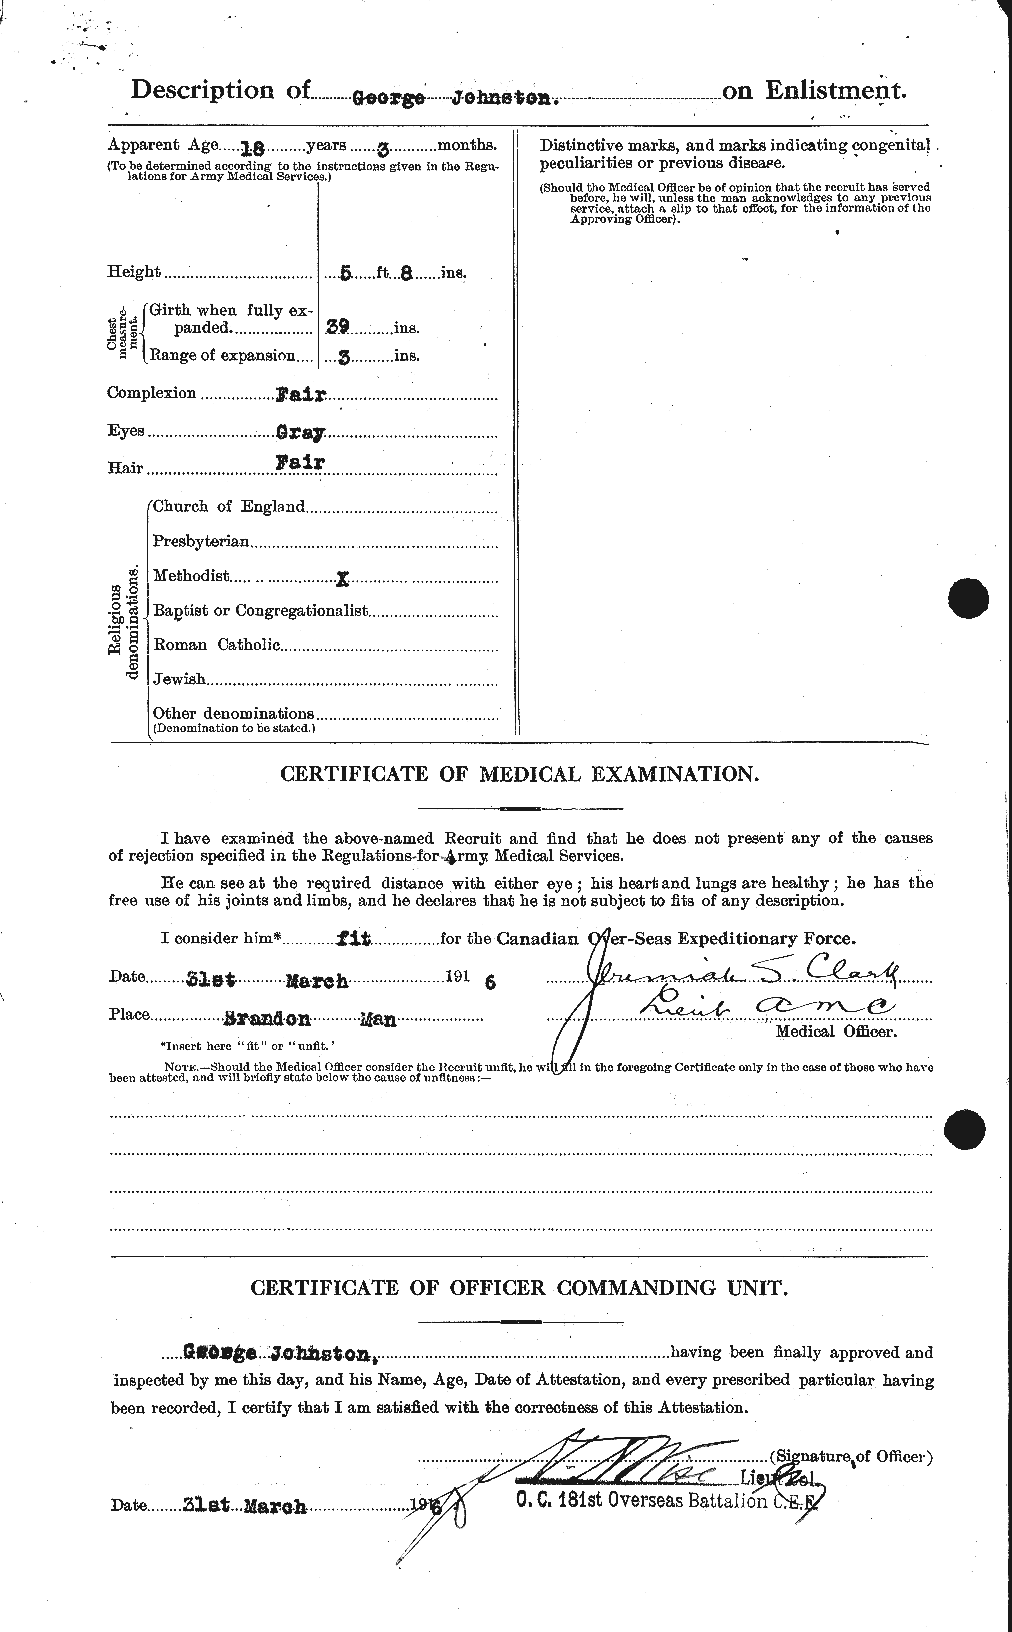 Personnel Records of the First World War - CEF 419458b